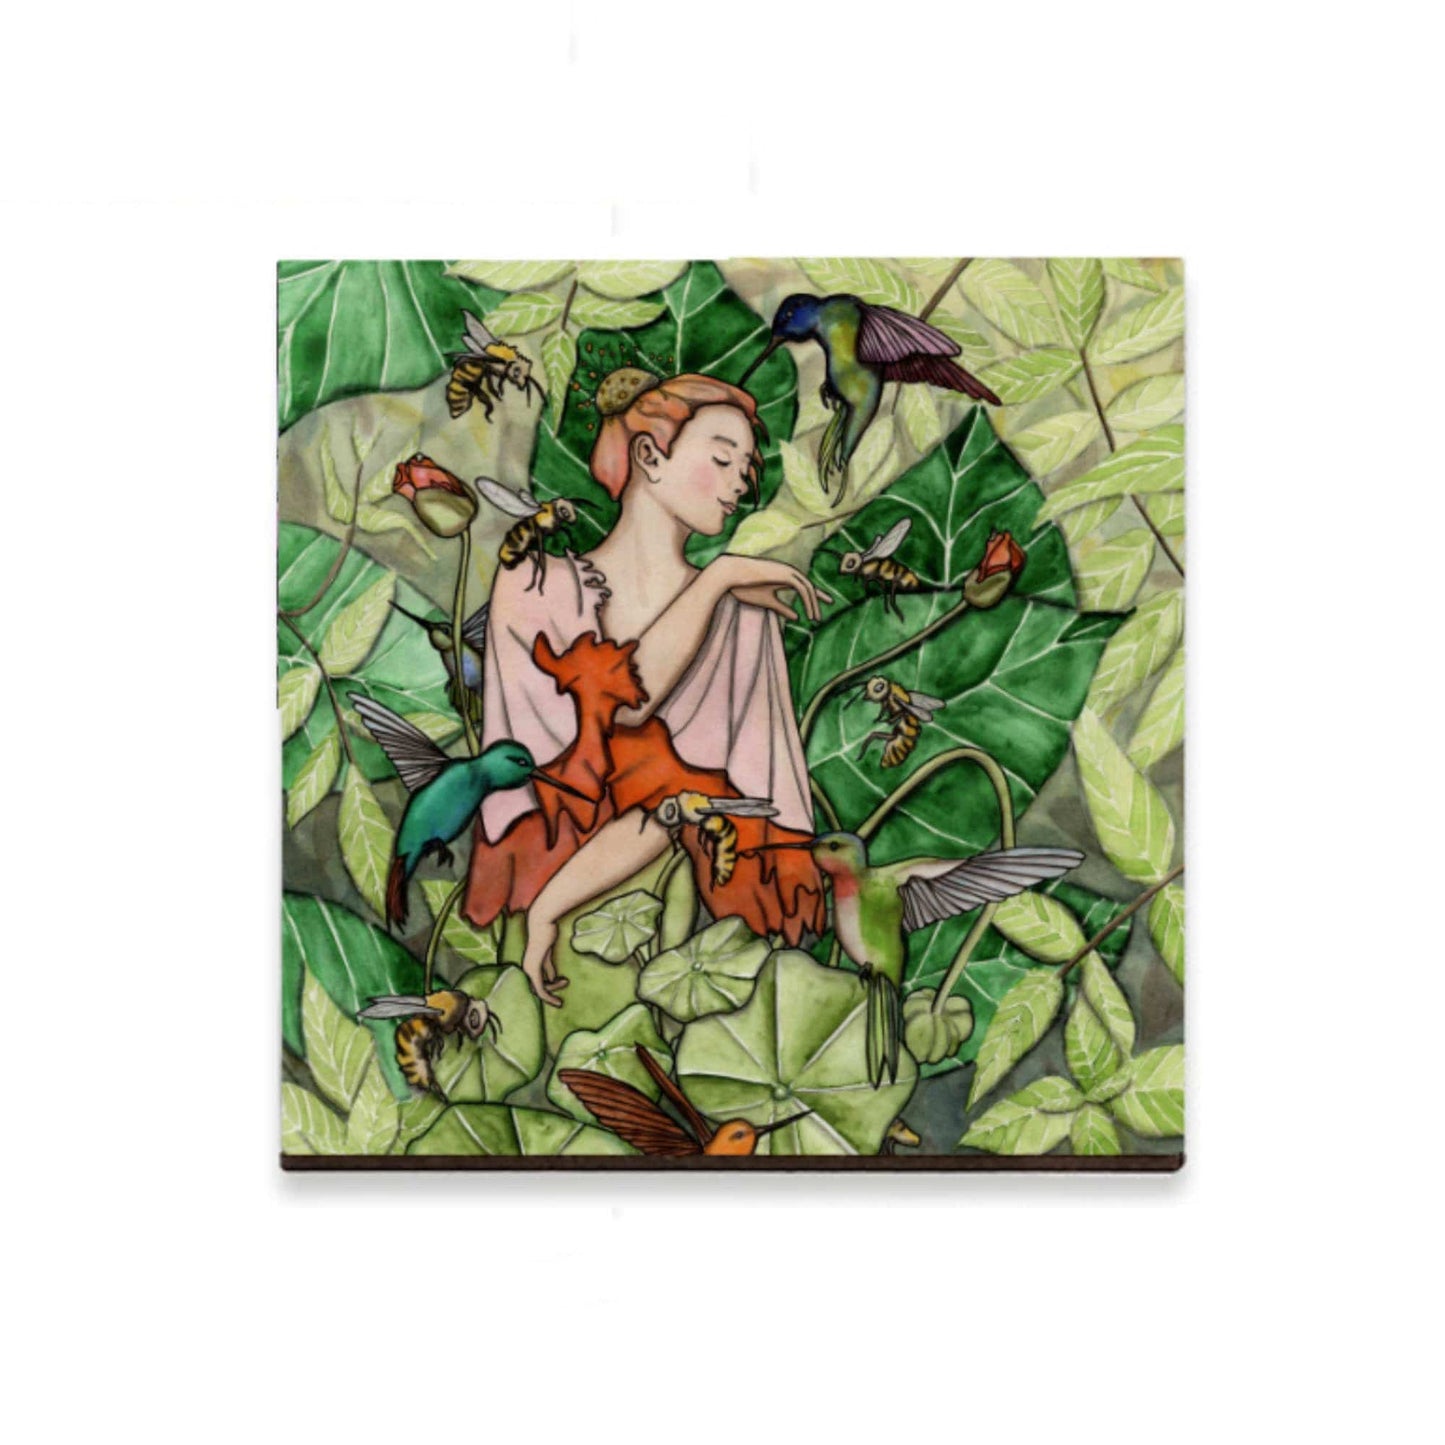 PinkPolish Design Refrigerator Magnets "Bloom" Fairy Inspired Watercolor - 2.25 Inch Wood Refrigerator Magnet